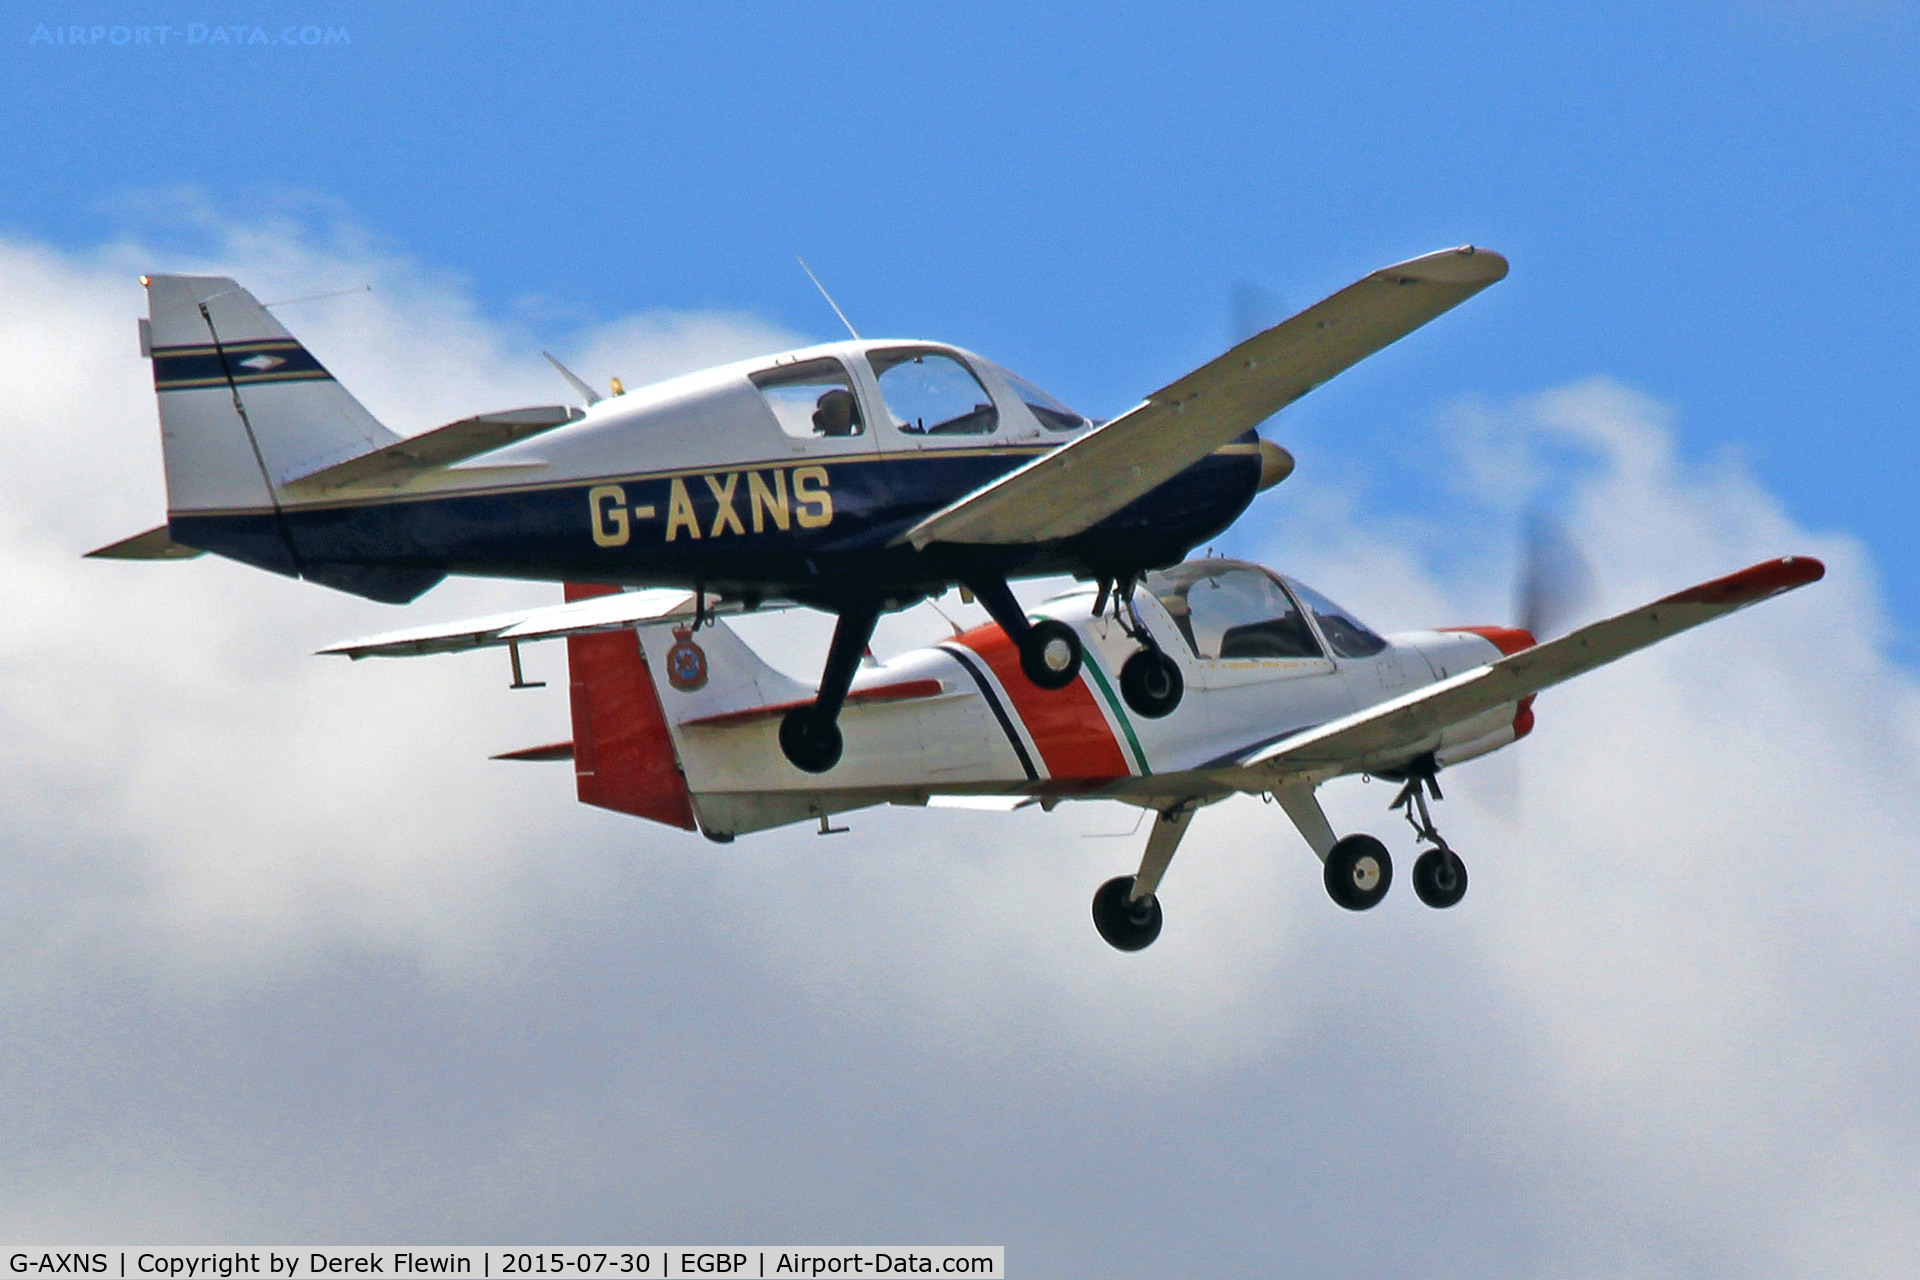 G-AXNS, 1969 Beagle B-121 Pup Series 2 (Pup 150) C/N B121-110, Pup, Gamston based, previously G-25-110, seen flying in close formation with G-BULL.